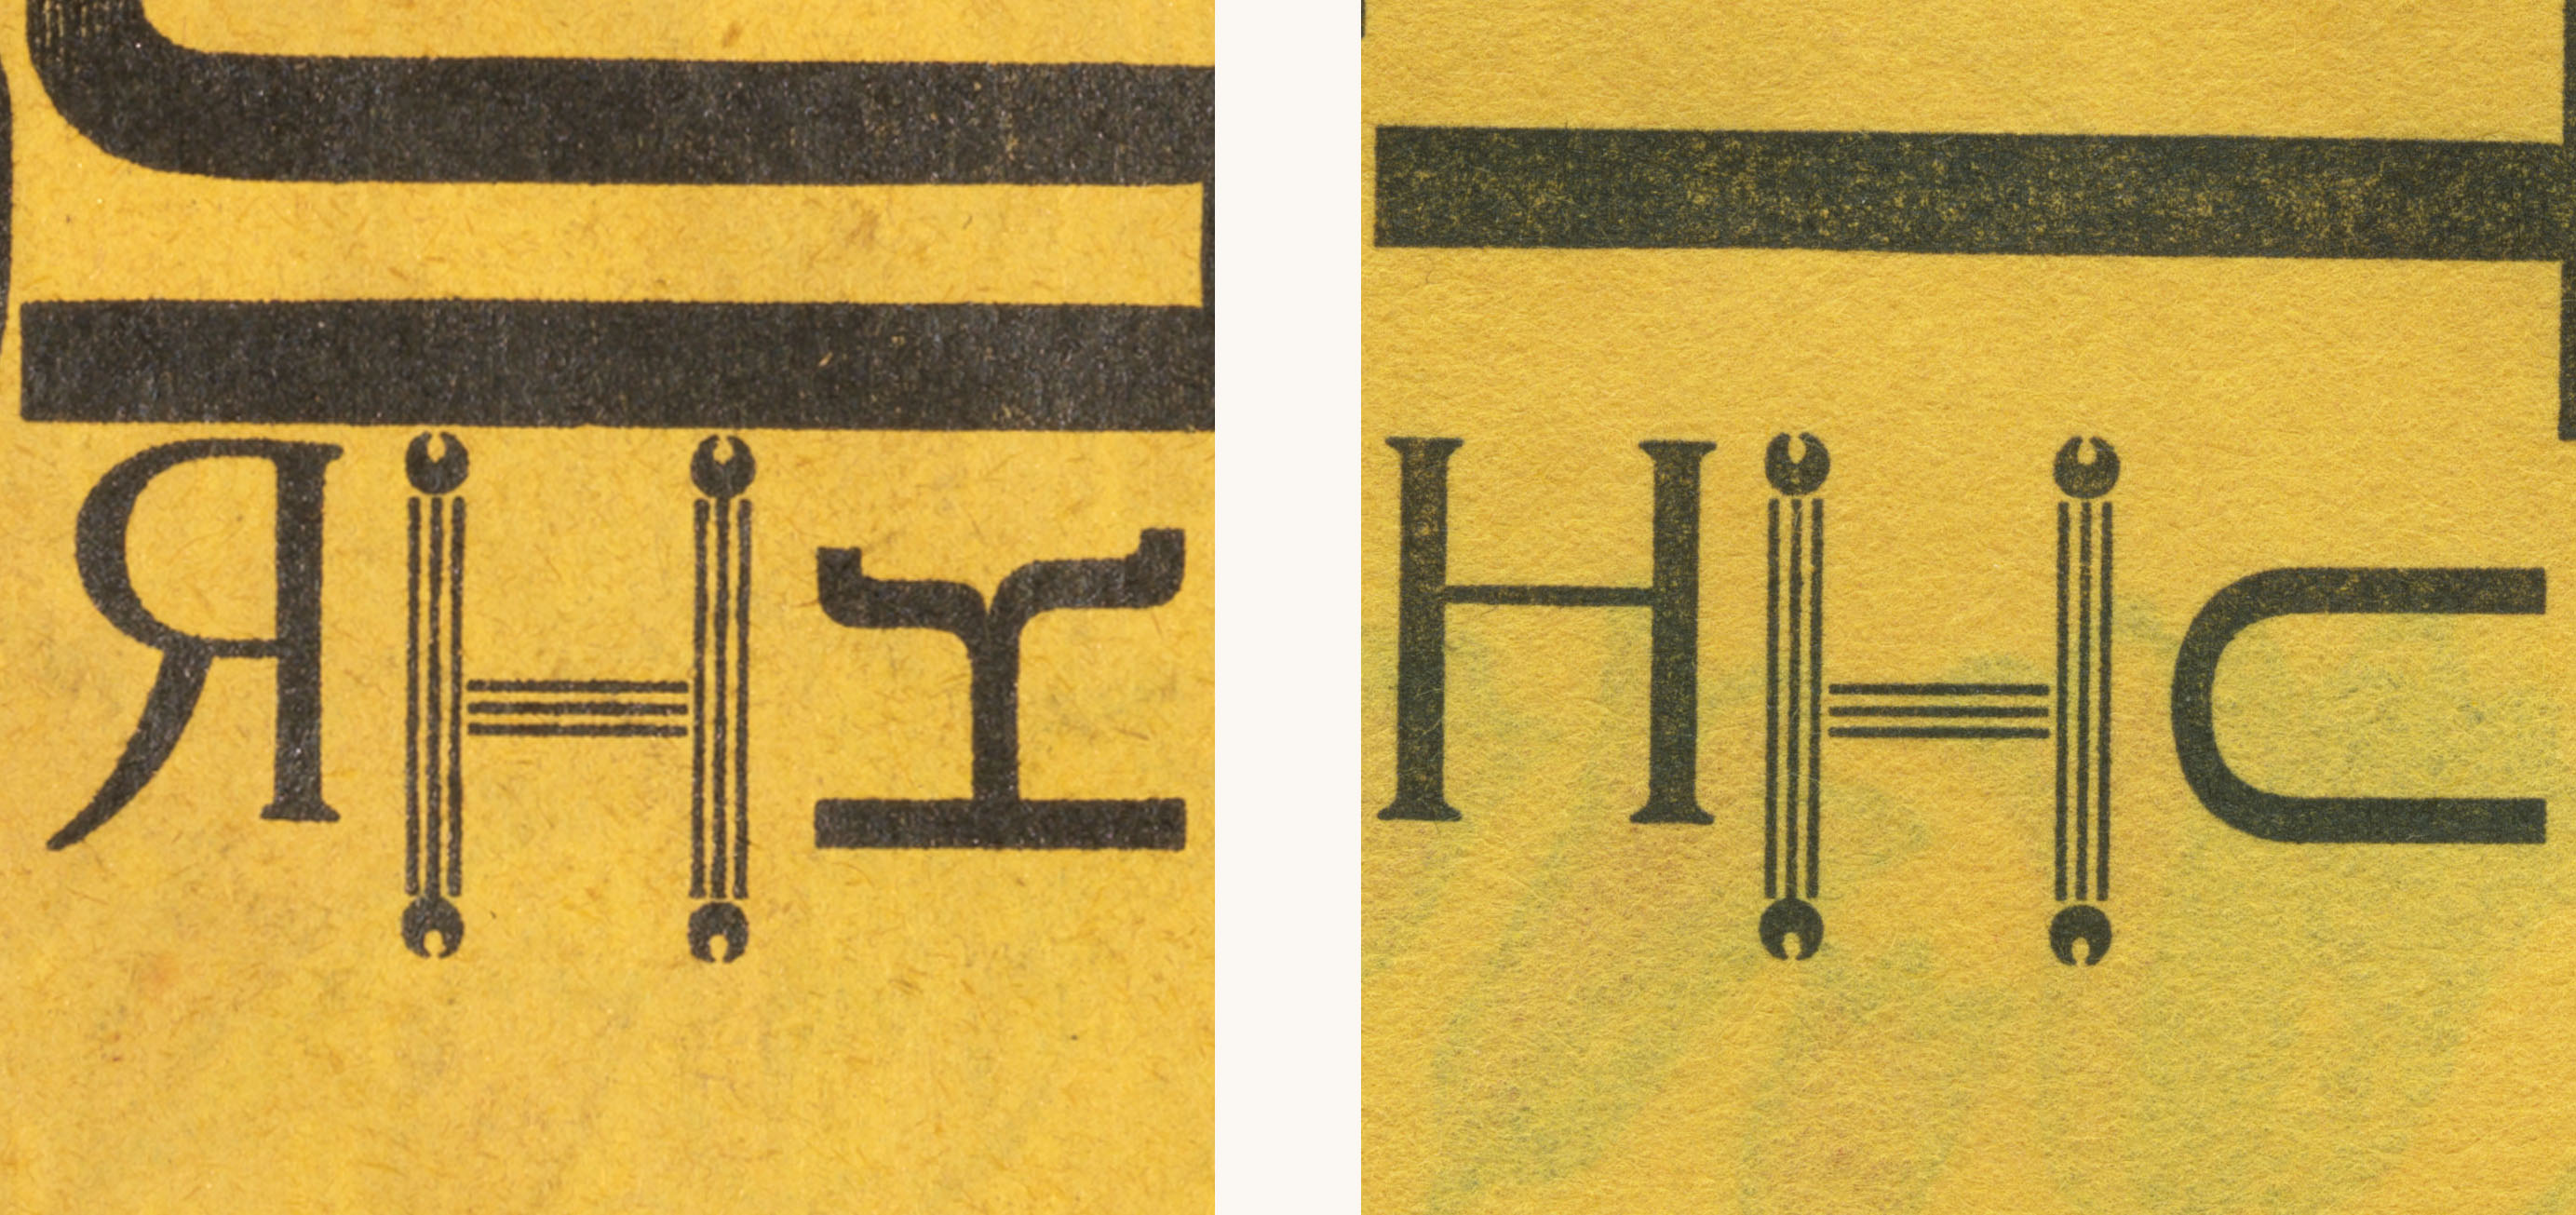 Image showing an excerpt from the last page in Russian and English showing a constructed 'H'.